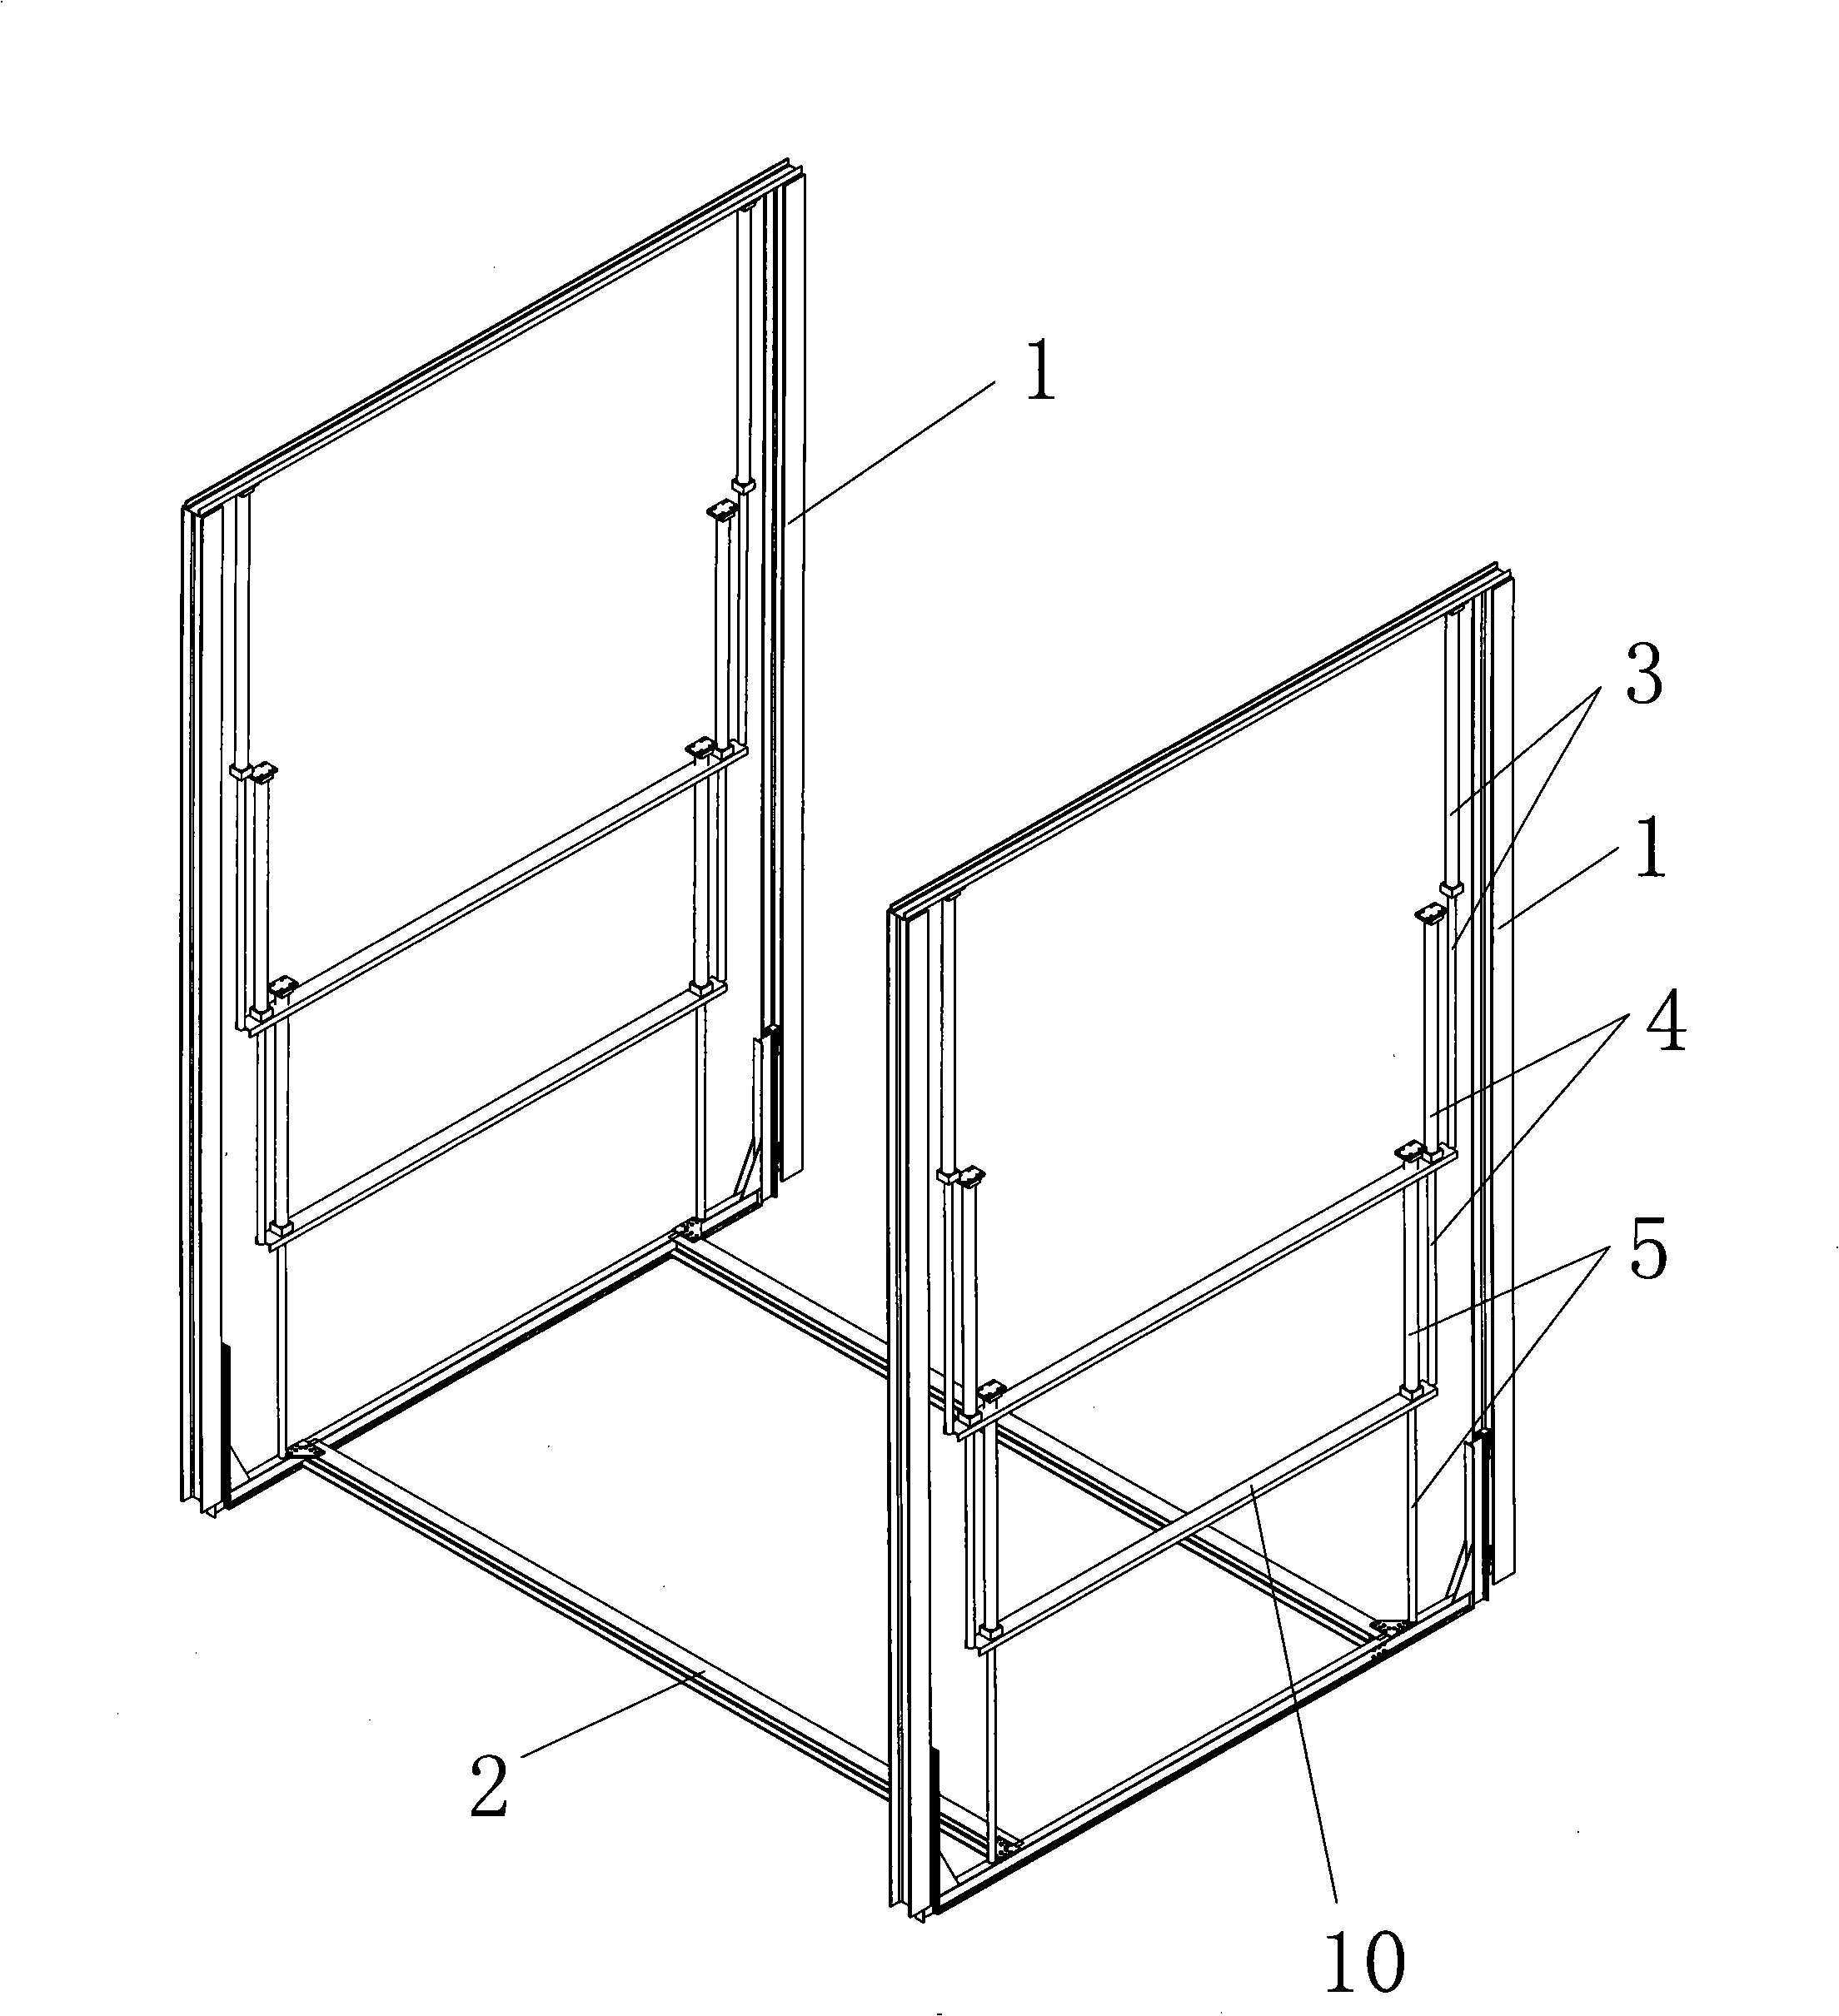 Inversion type hydraulic relay elevator apparatus for multi-storied garage